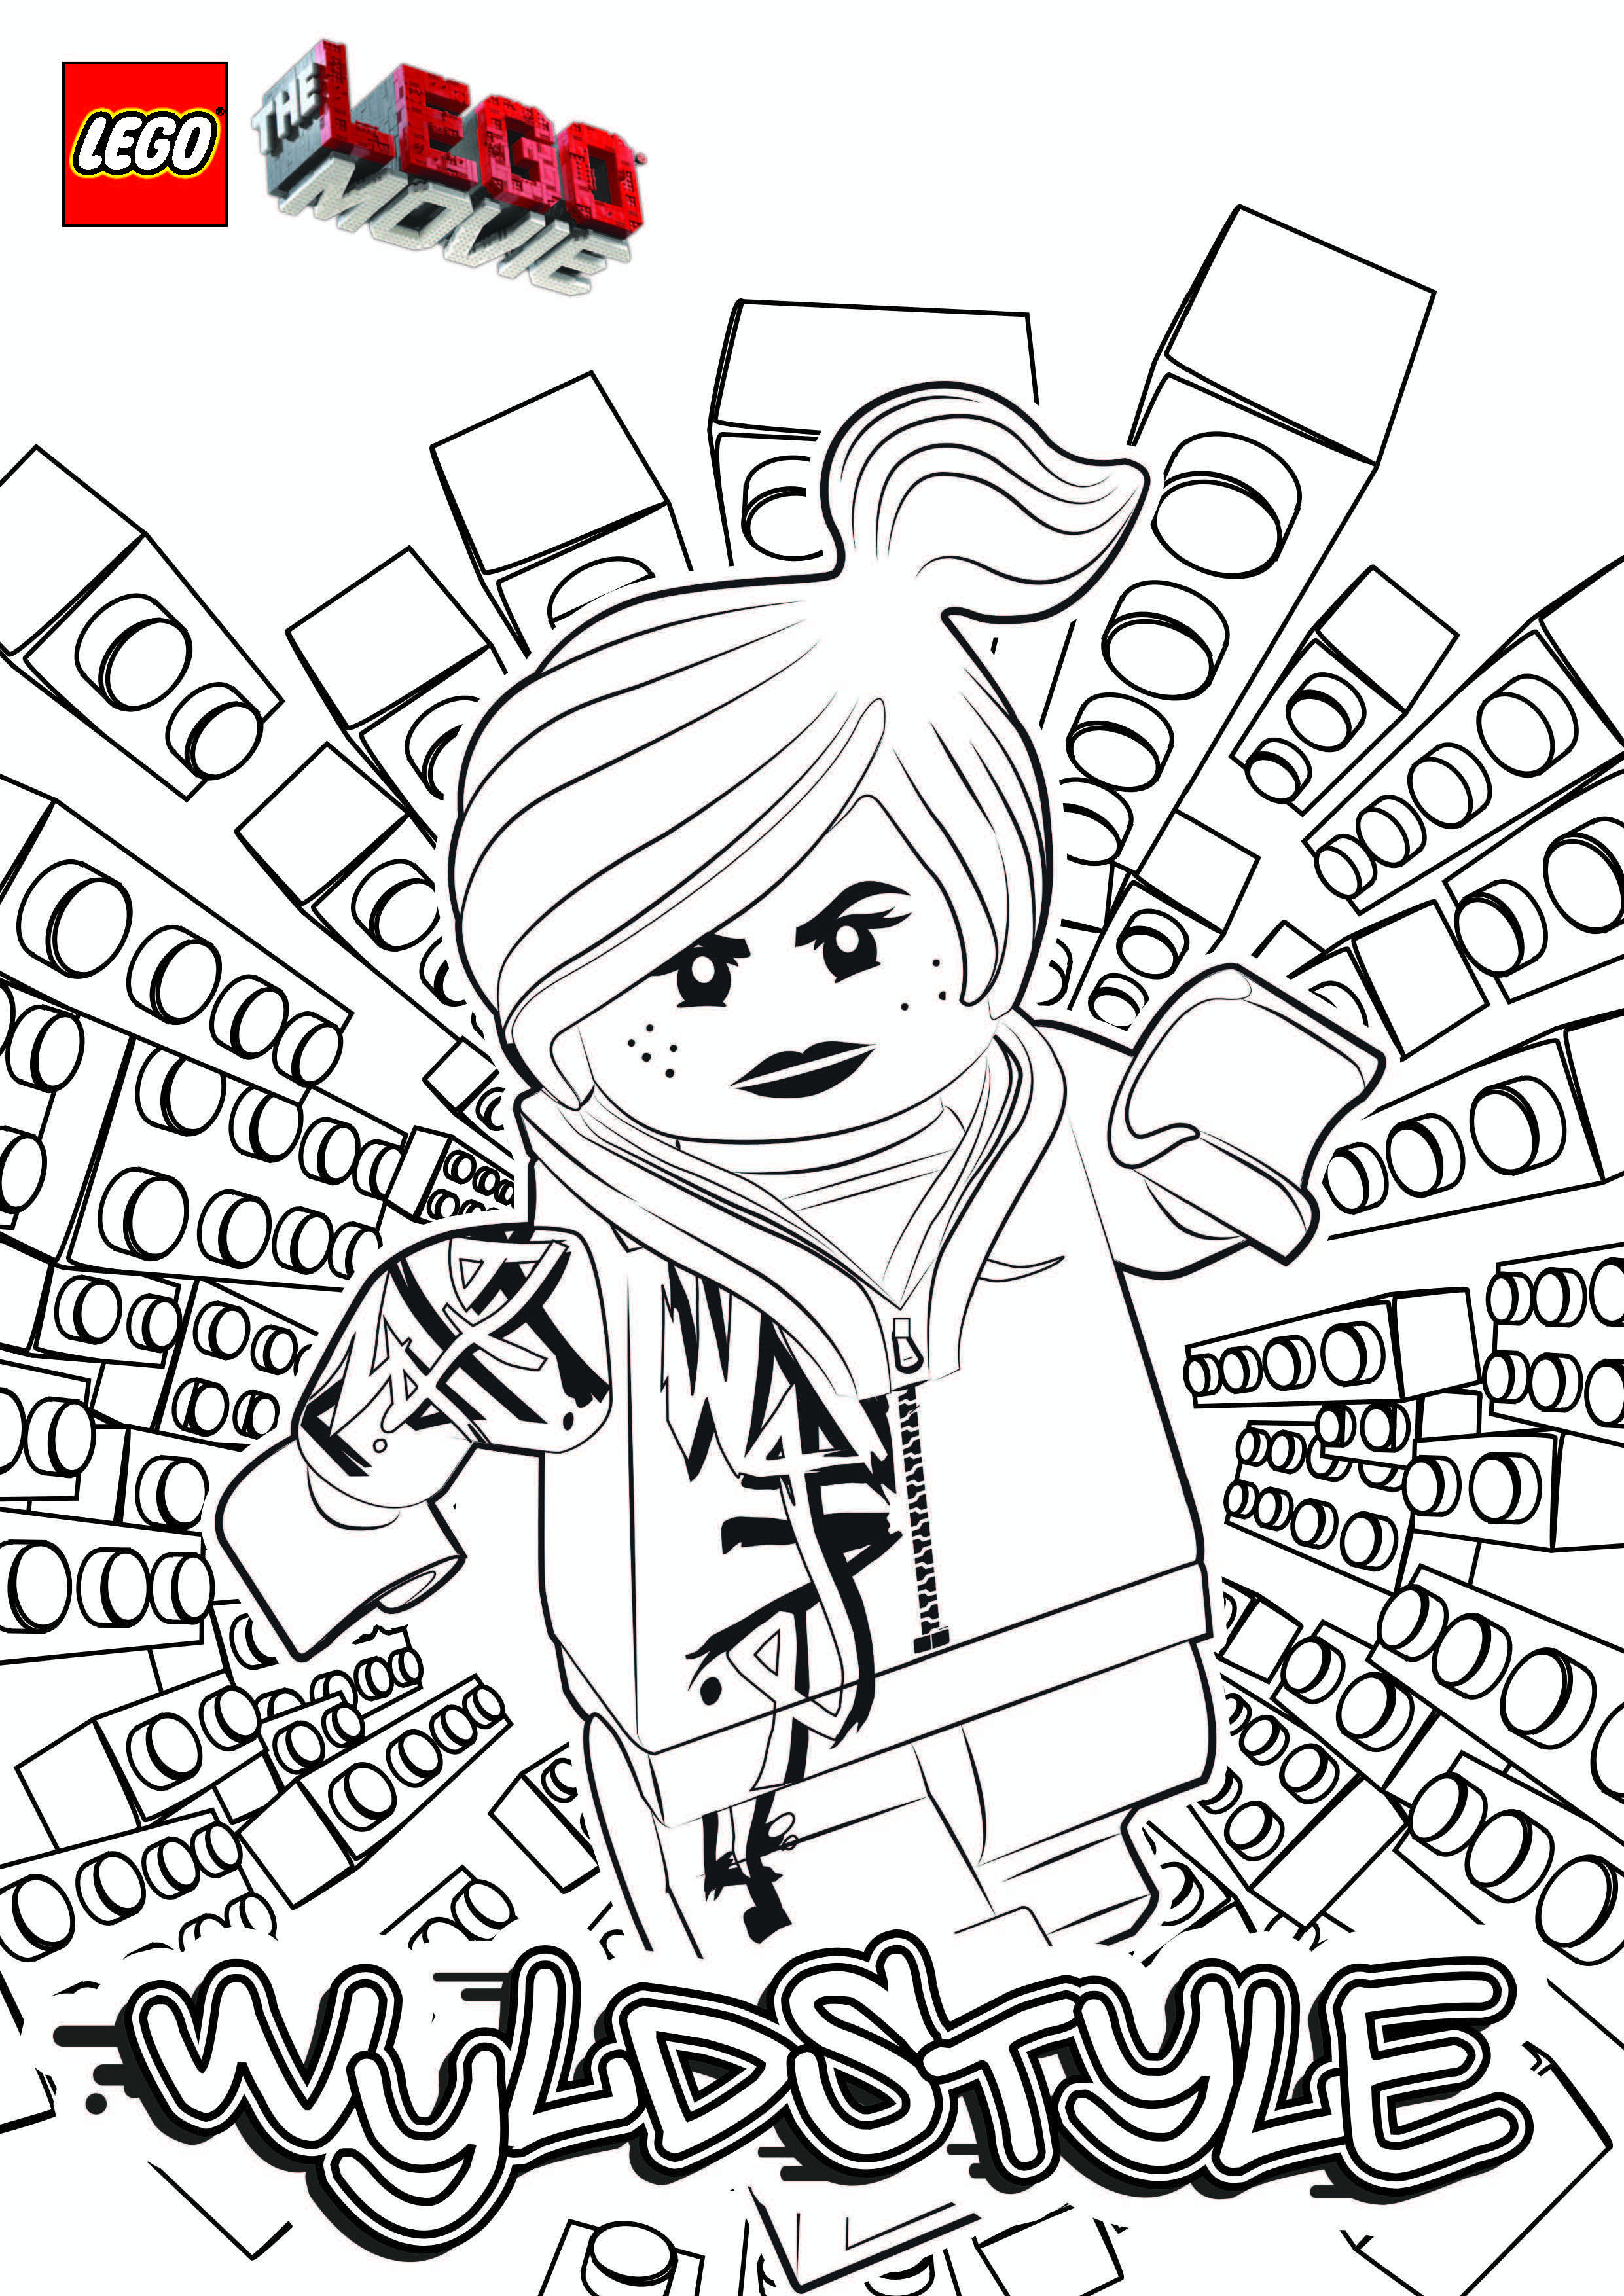 free-lego-movie-coloring-pages-download-free-lego-movie-coloring-pages